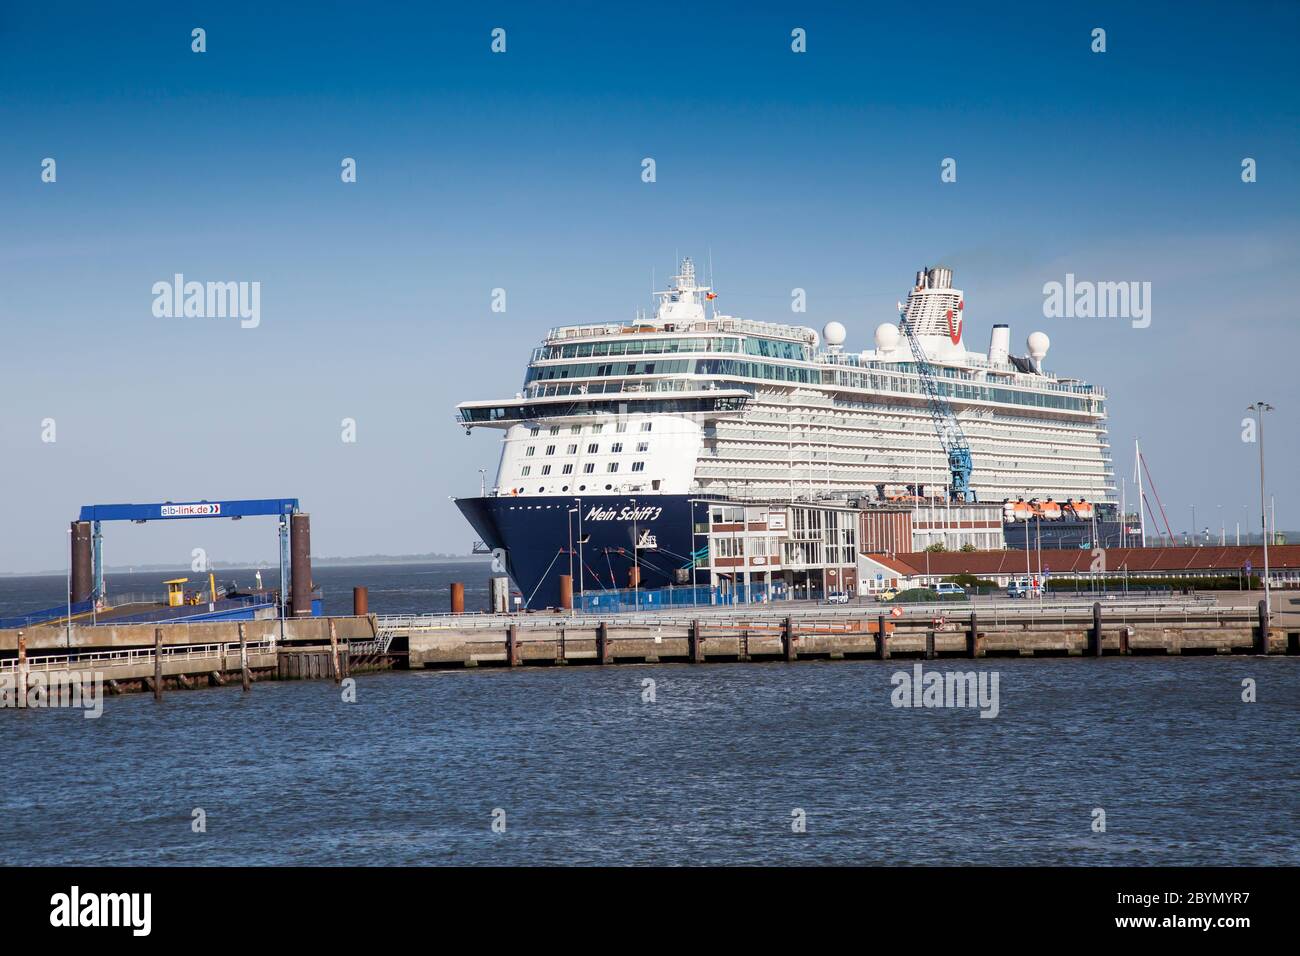 Cruise ship Mein Schiff 3, pier Cuxhaven,Germany, Europe Stock Photo